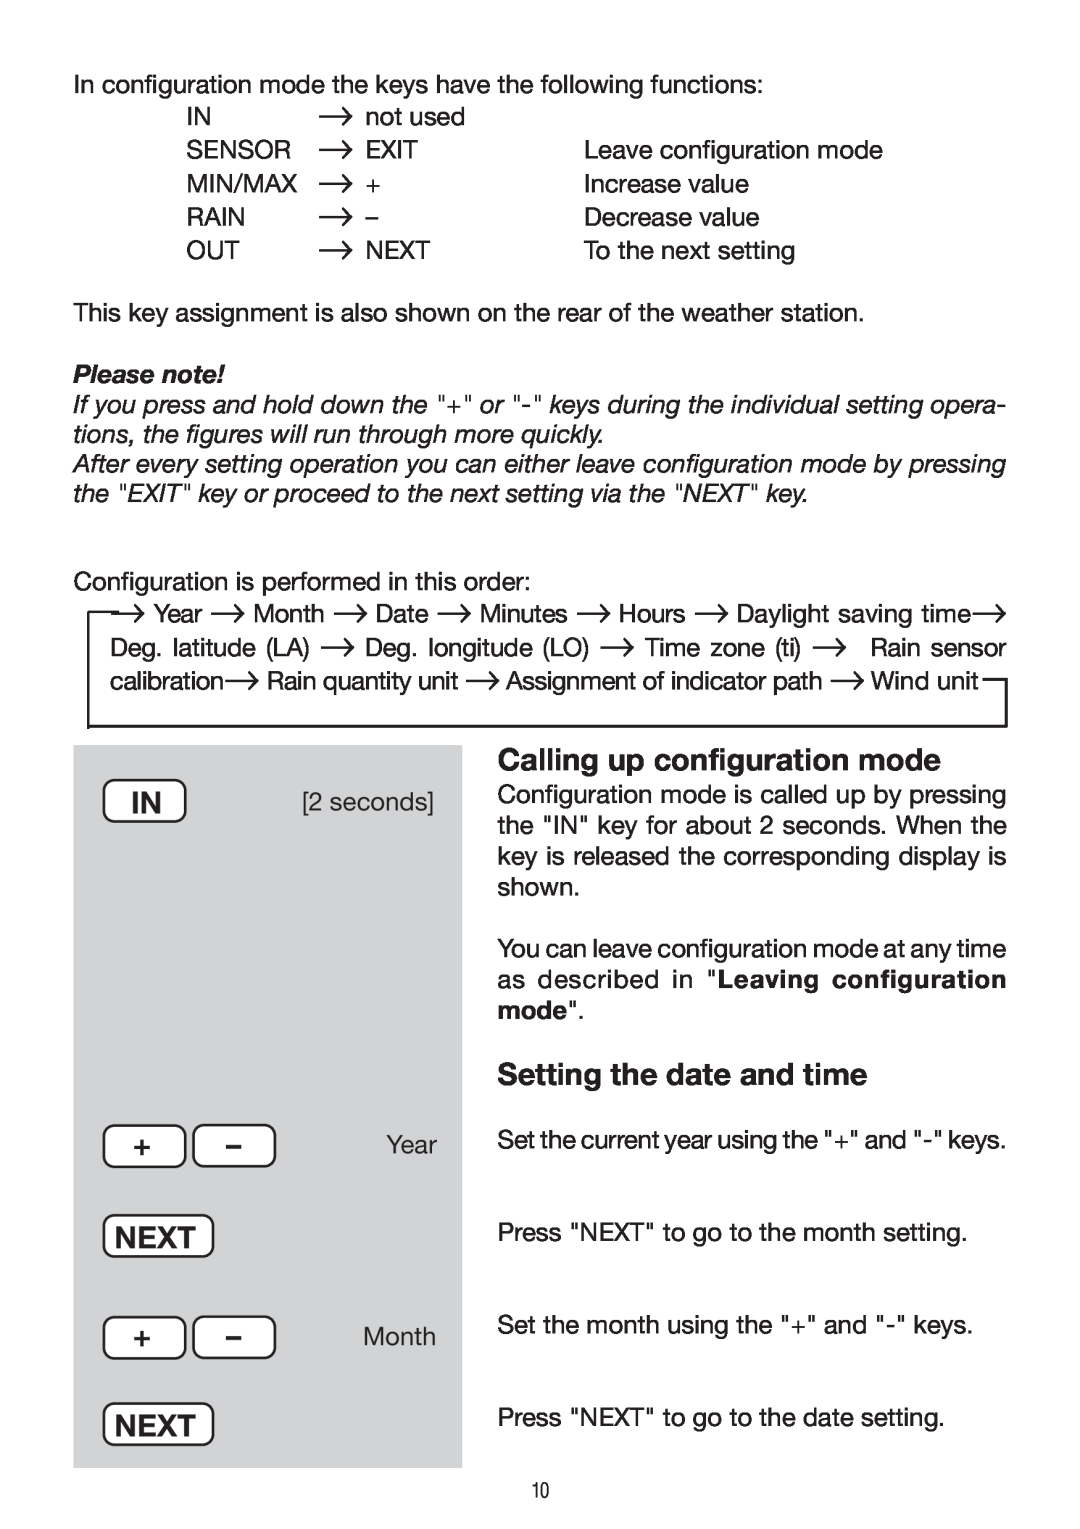 P3 International E 9300 operating instructions Calling up configuration mode, Setting the date and time, Next, Please note 